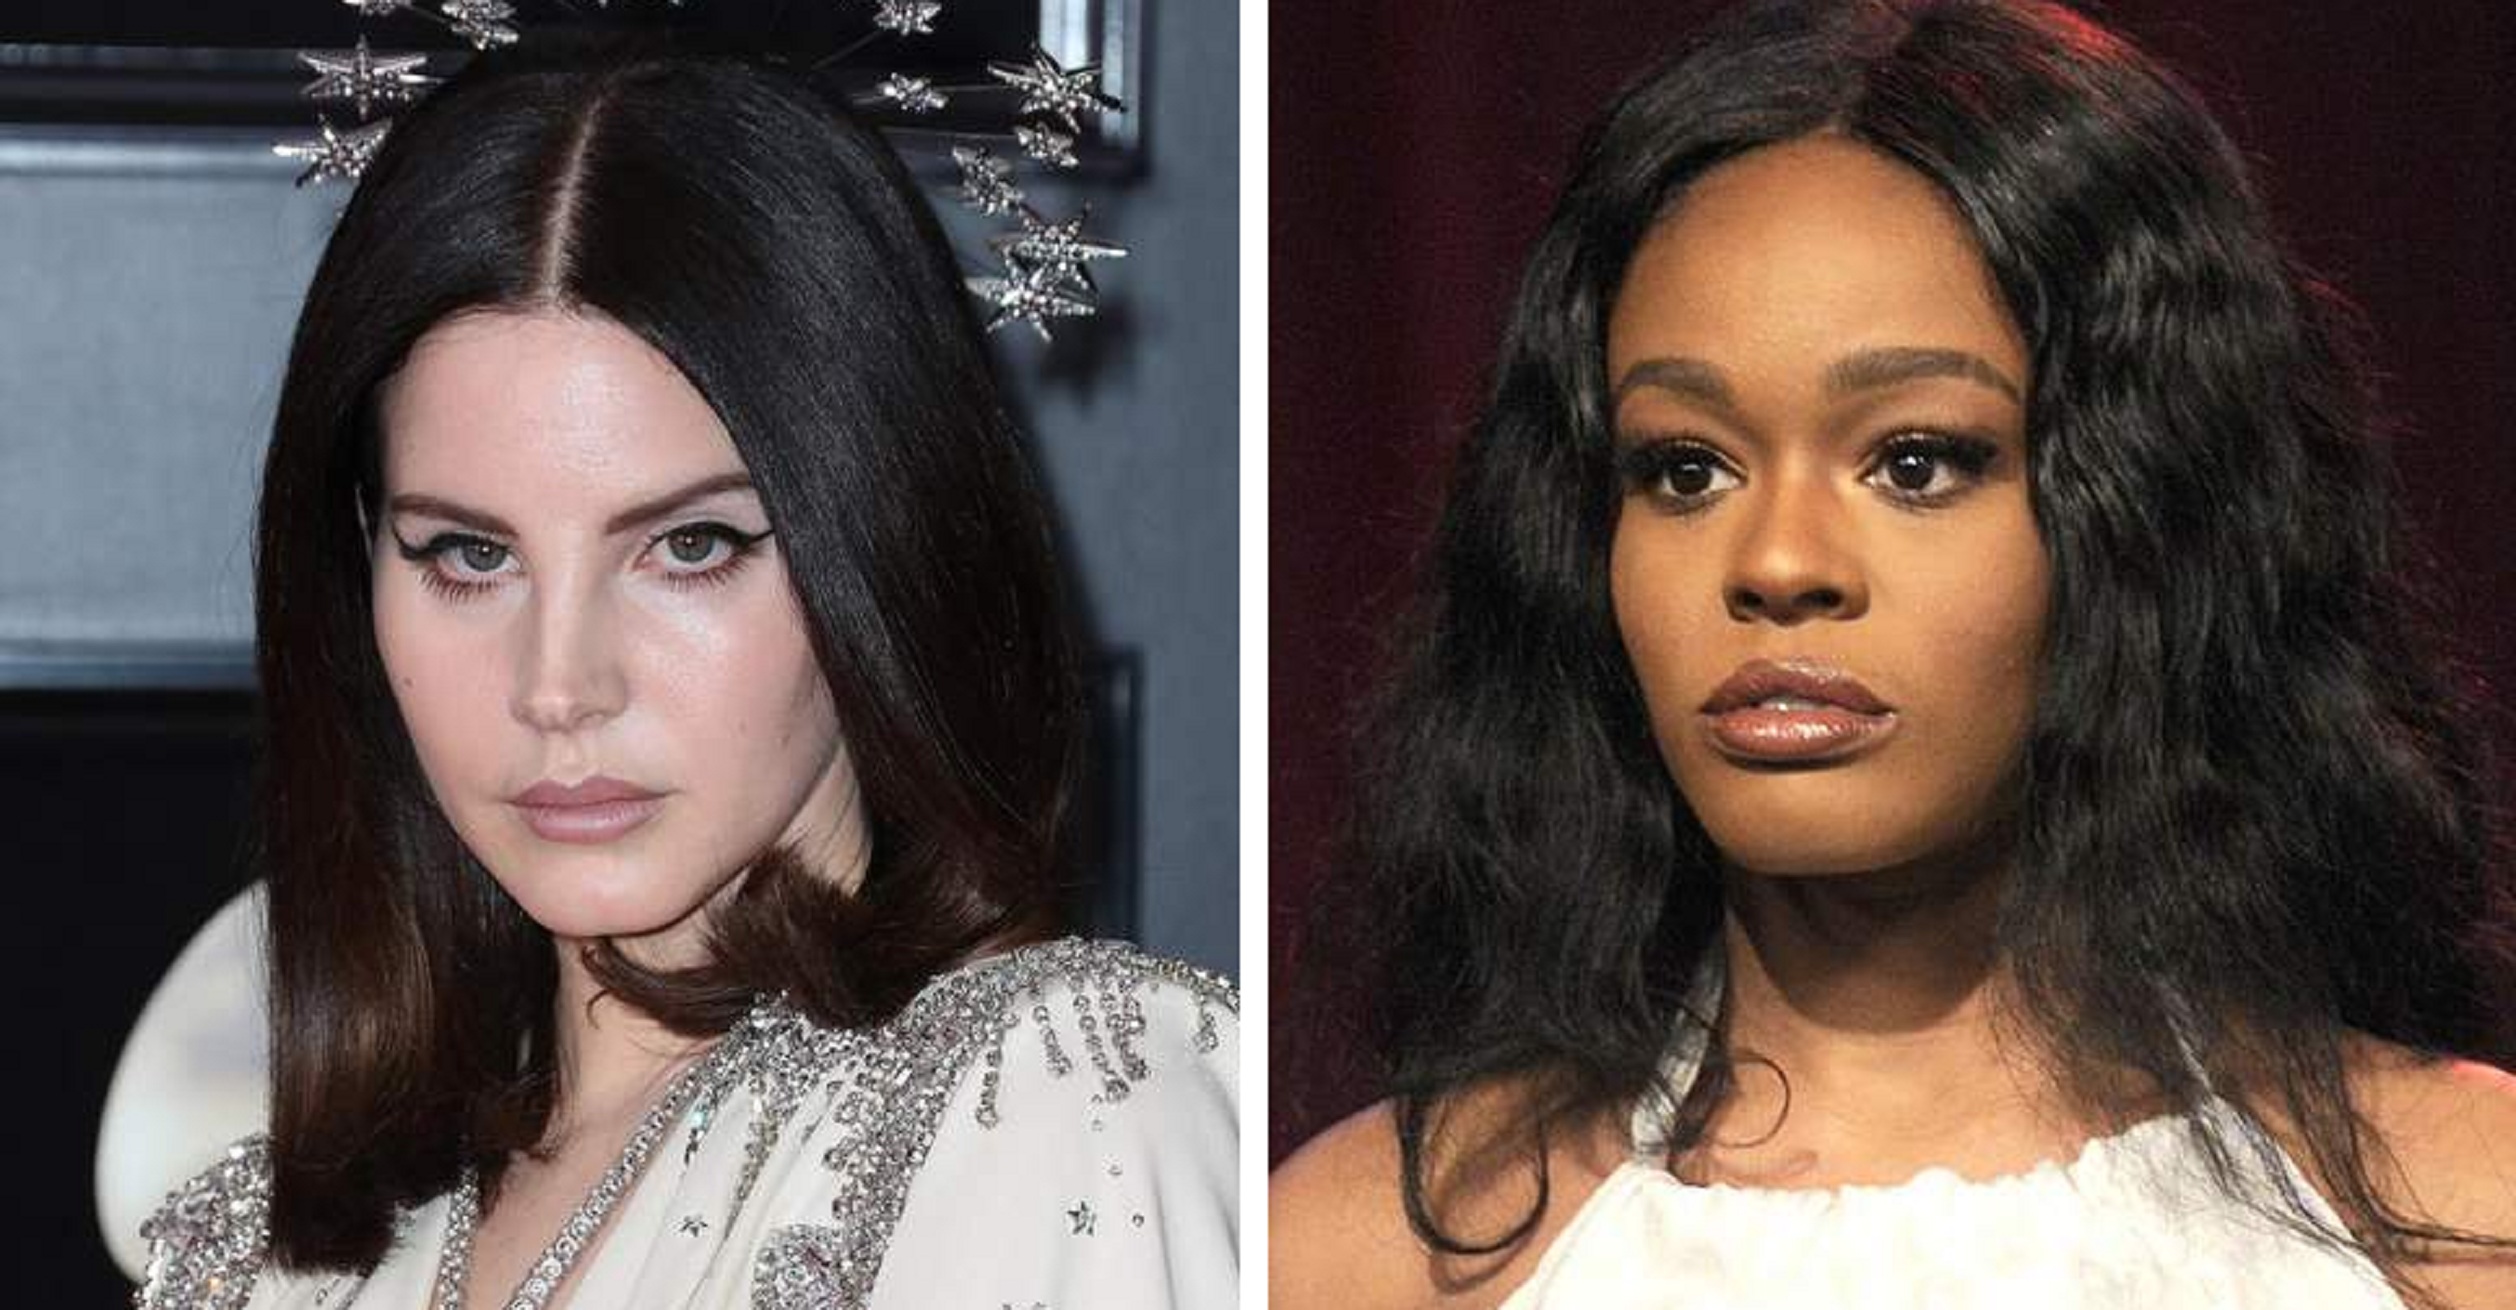 Azealia Banks Suggests Lana Del Rey Slept with Harvey Weinstein To Get a Project